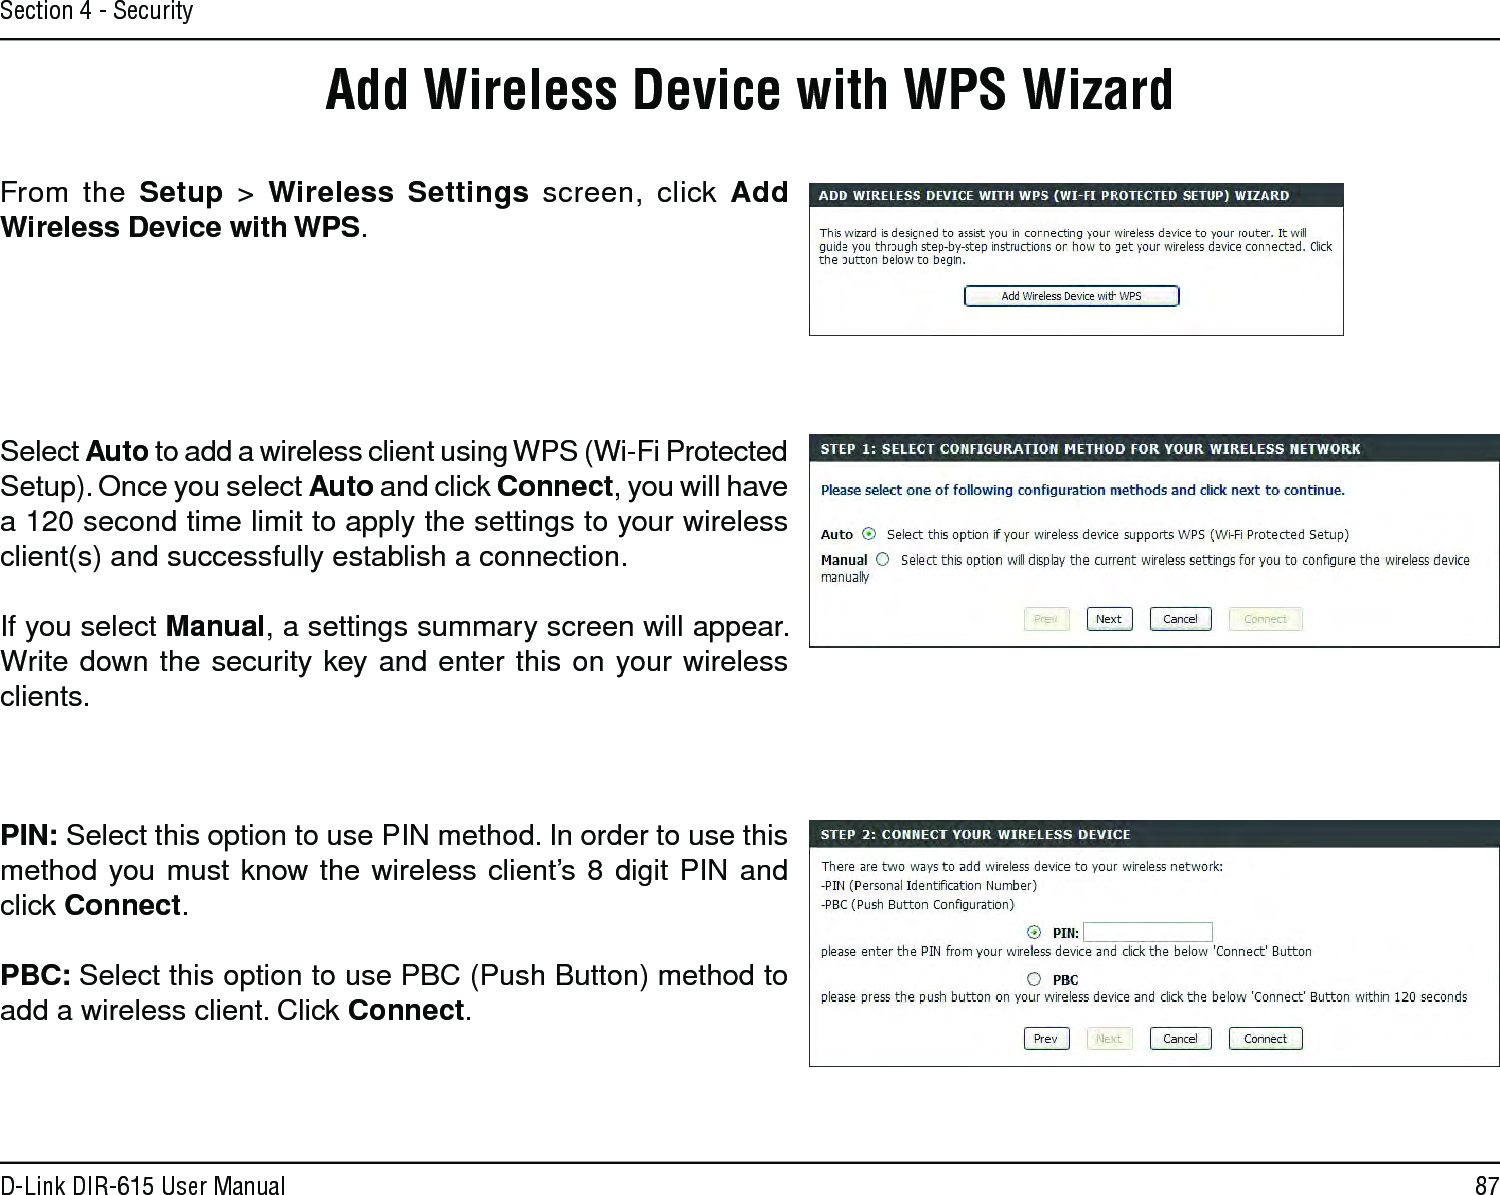 87D-Link DIR-615 User ManualSection 4 - SecurityFrom the Setup  &gt; Wireless Settings screen, click Add Wireless Device with WPS.Add Wireless Device with WPS WizardPIN: Select this option to use PIN method. In order to use this method you must know the wireless client’s 8 digit PIN and click Connect.PBC: Select this option to use PBC (Push Button) method to add a wireless client. Click Connect.Select Auto to add a wireless client using WPS (Wi-Fi Protected Setup). Once you select Auto and click Connect, you will have a 120 second time limit to apply the settings to your wireless client(s) and successfully establish a connection. If you select Manual, a settings summary screen will appear. Write down the security key and enter this on your wireless clients. 